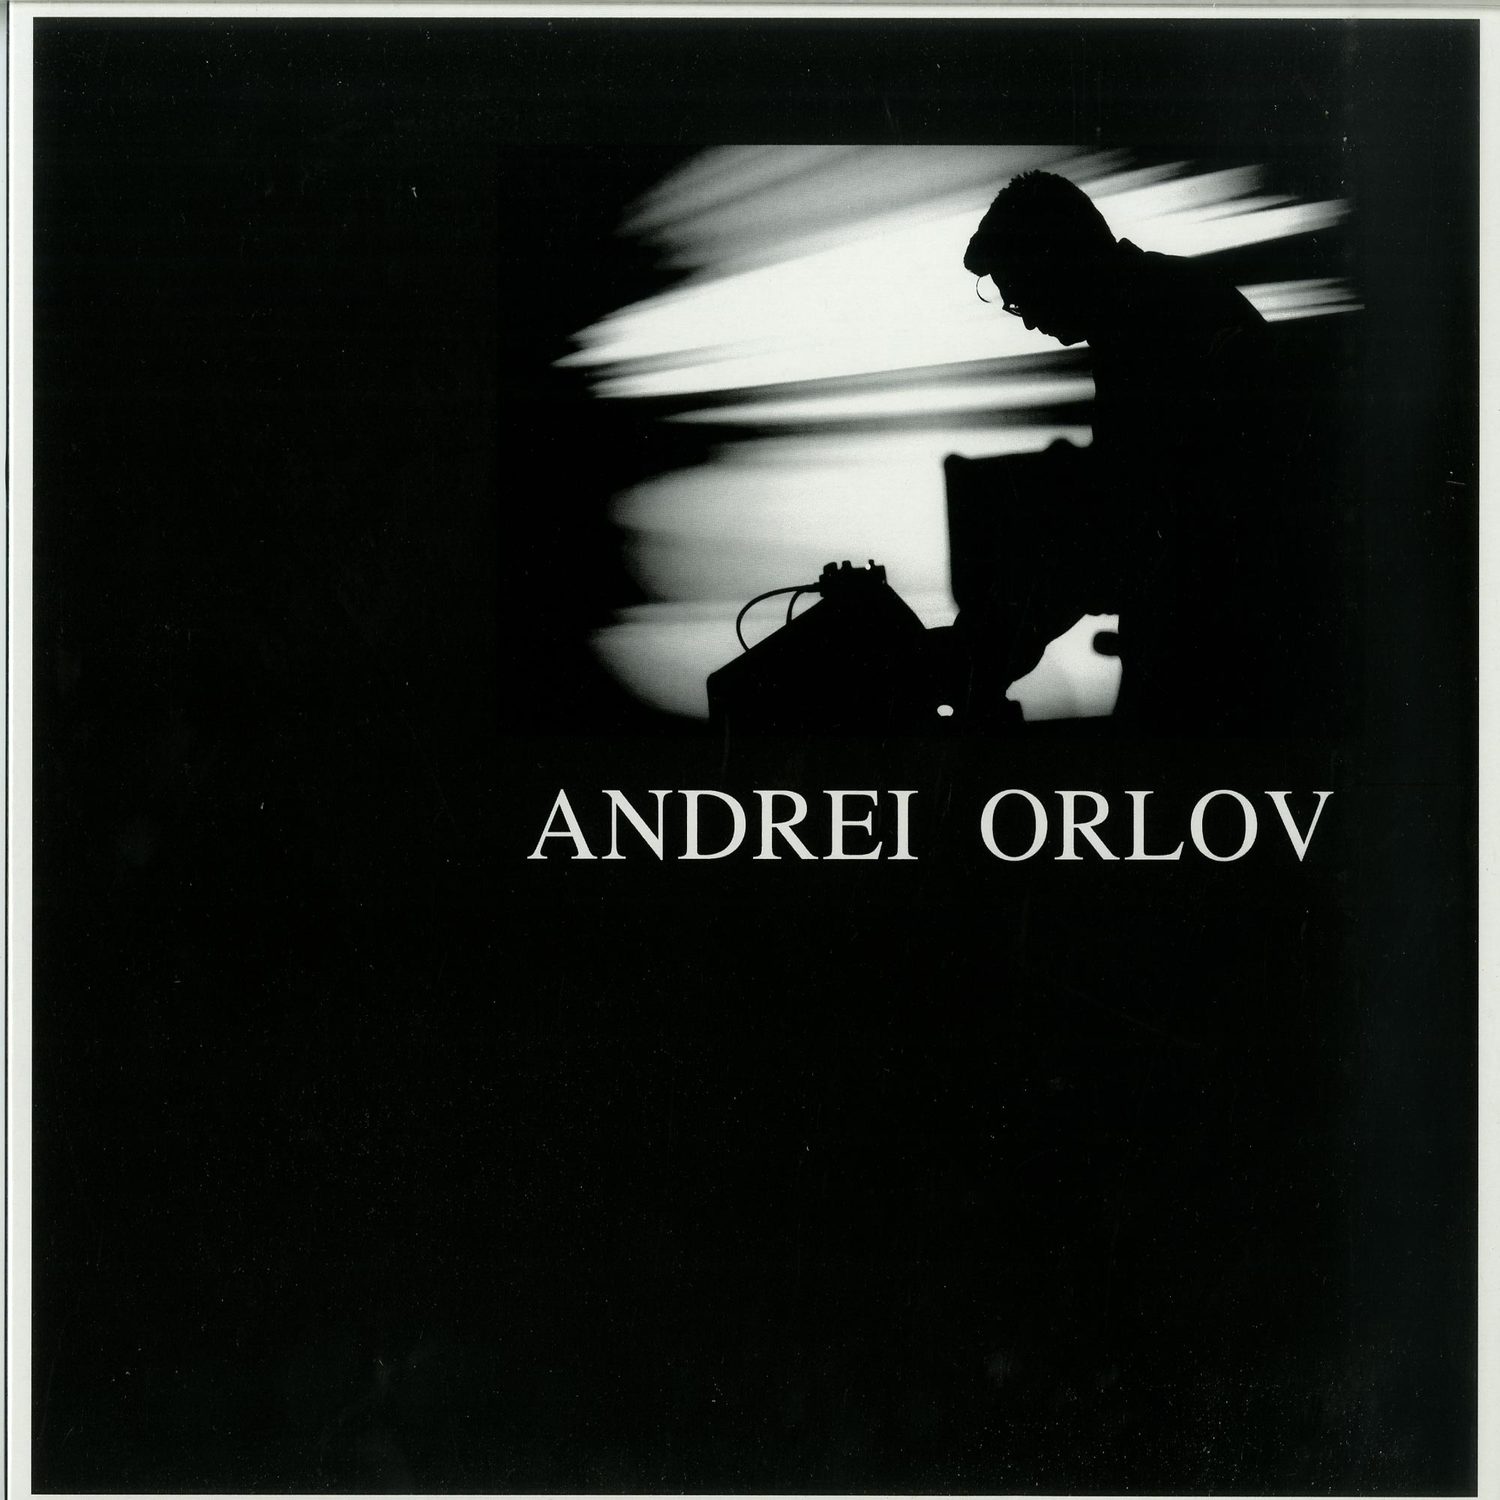 Andrei Orlov - SOMETHING NEW WHICH SURPRISES EVEN OURSELVES